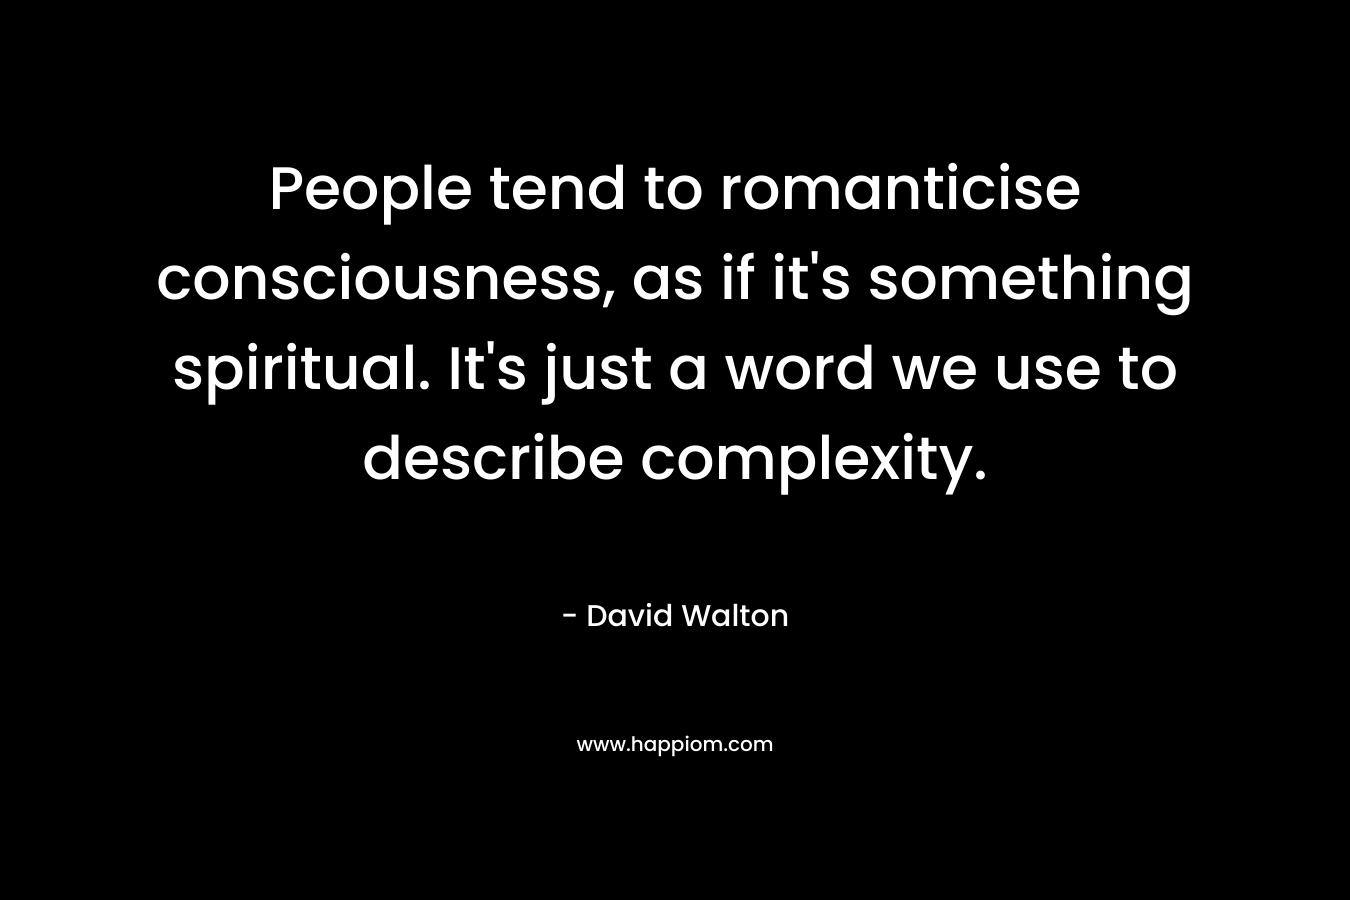 People tend to romanticise consciousness, as if it’s something spiritual. It’s just a word we use to describe complexity. – David  Walton